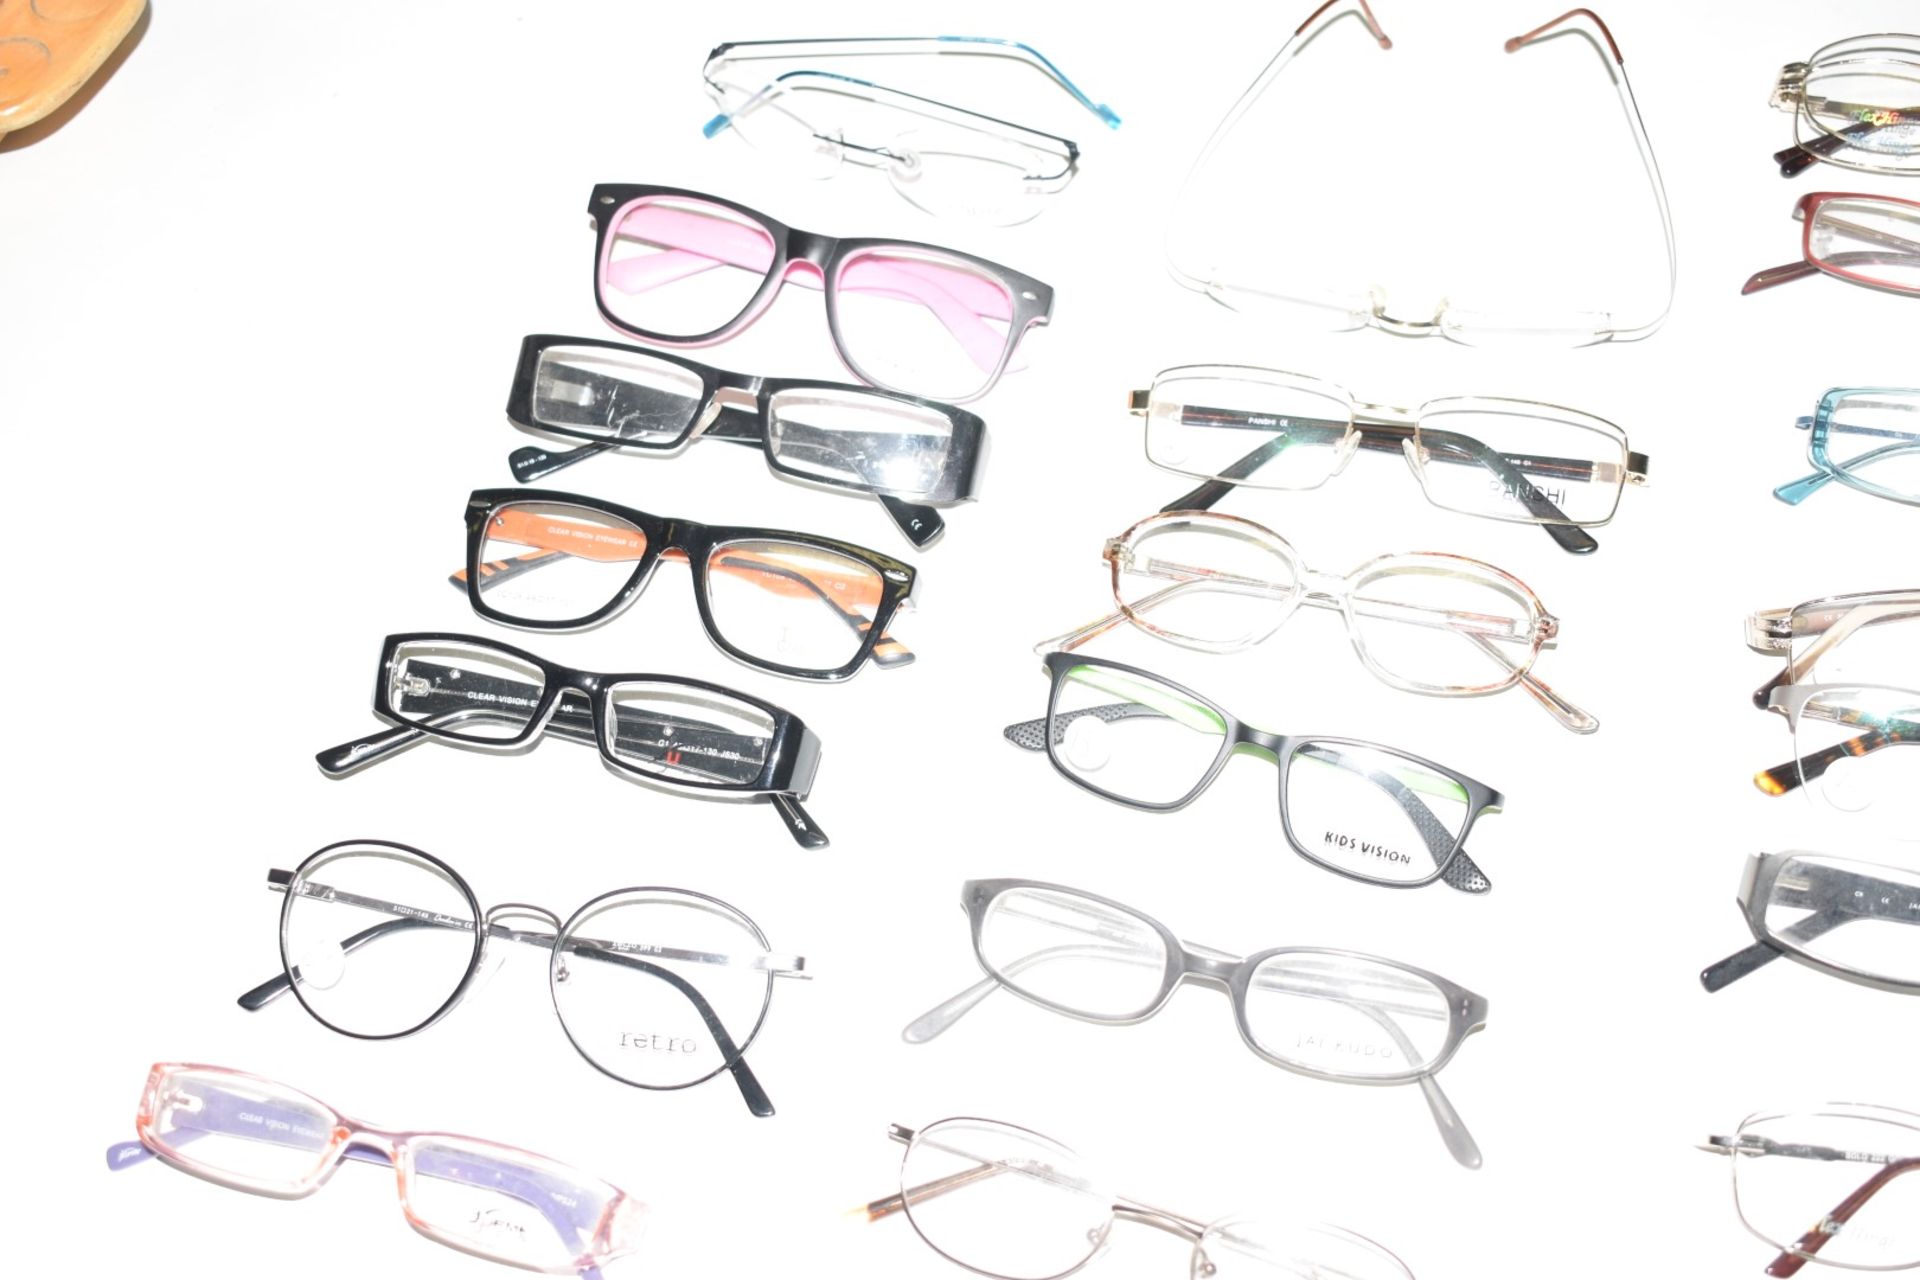 50 x Assorted Pairs of Spectacle Eye Glasses - New and Unused Stock - Various Designs and Brands - Image 12 of 19